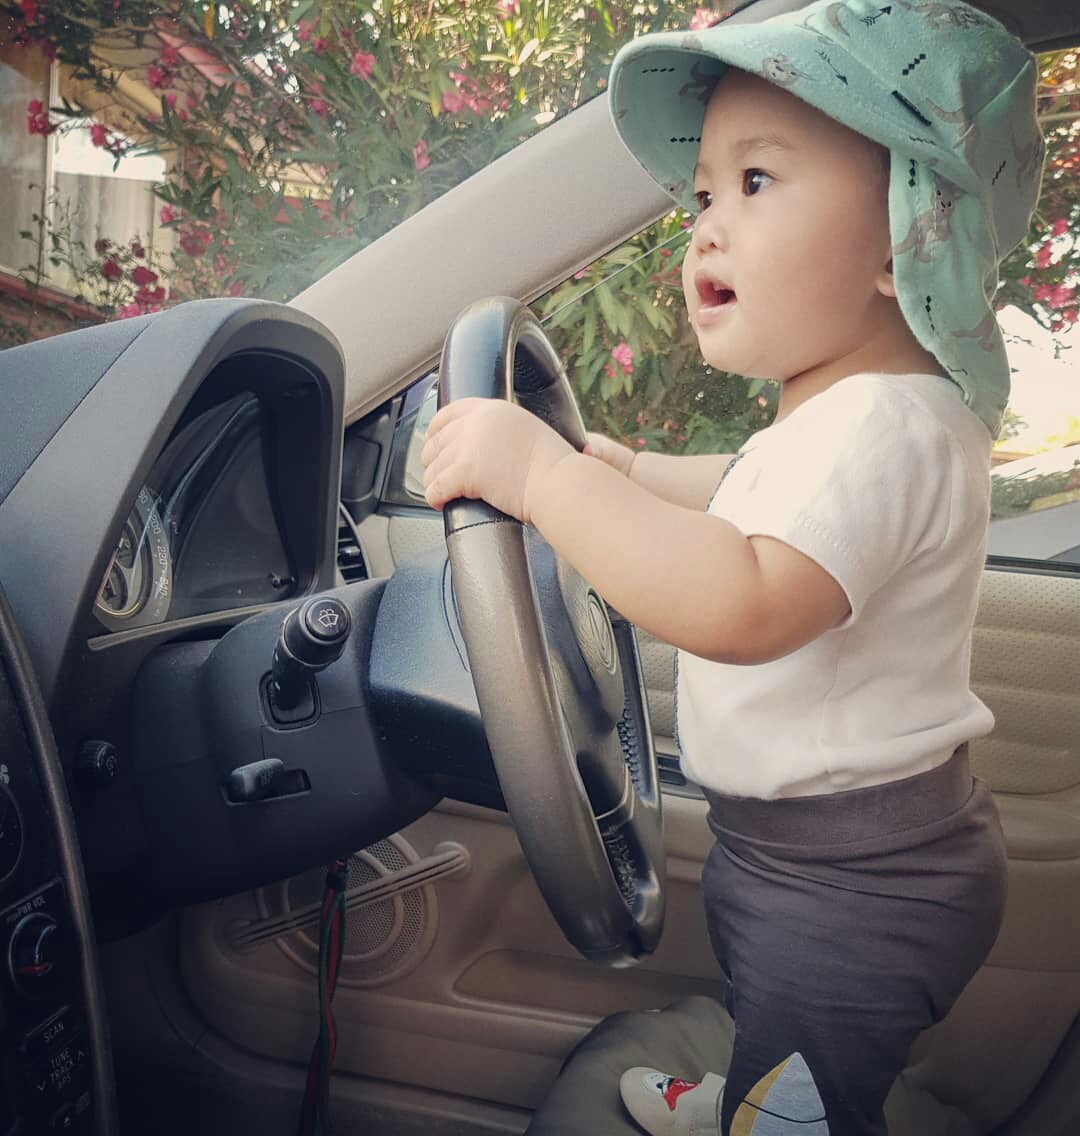 Protect yourself and your kids when in the car.